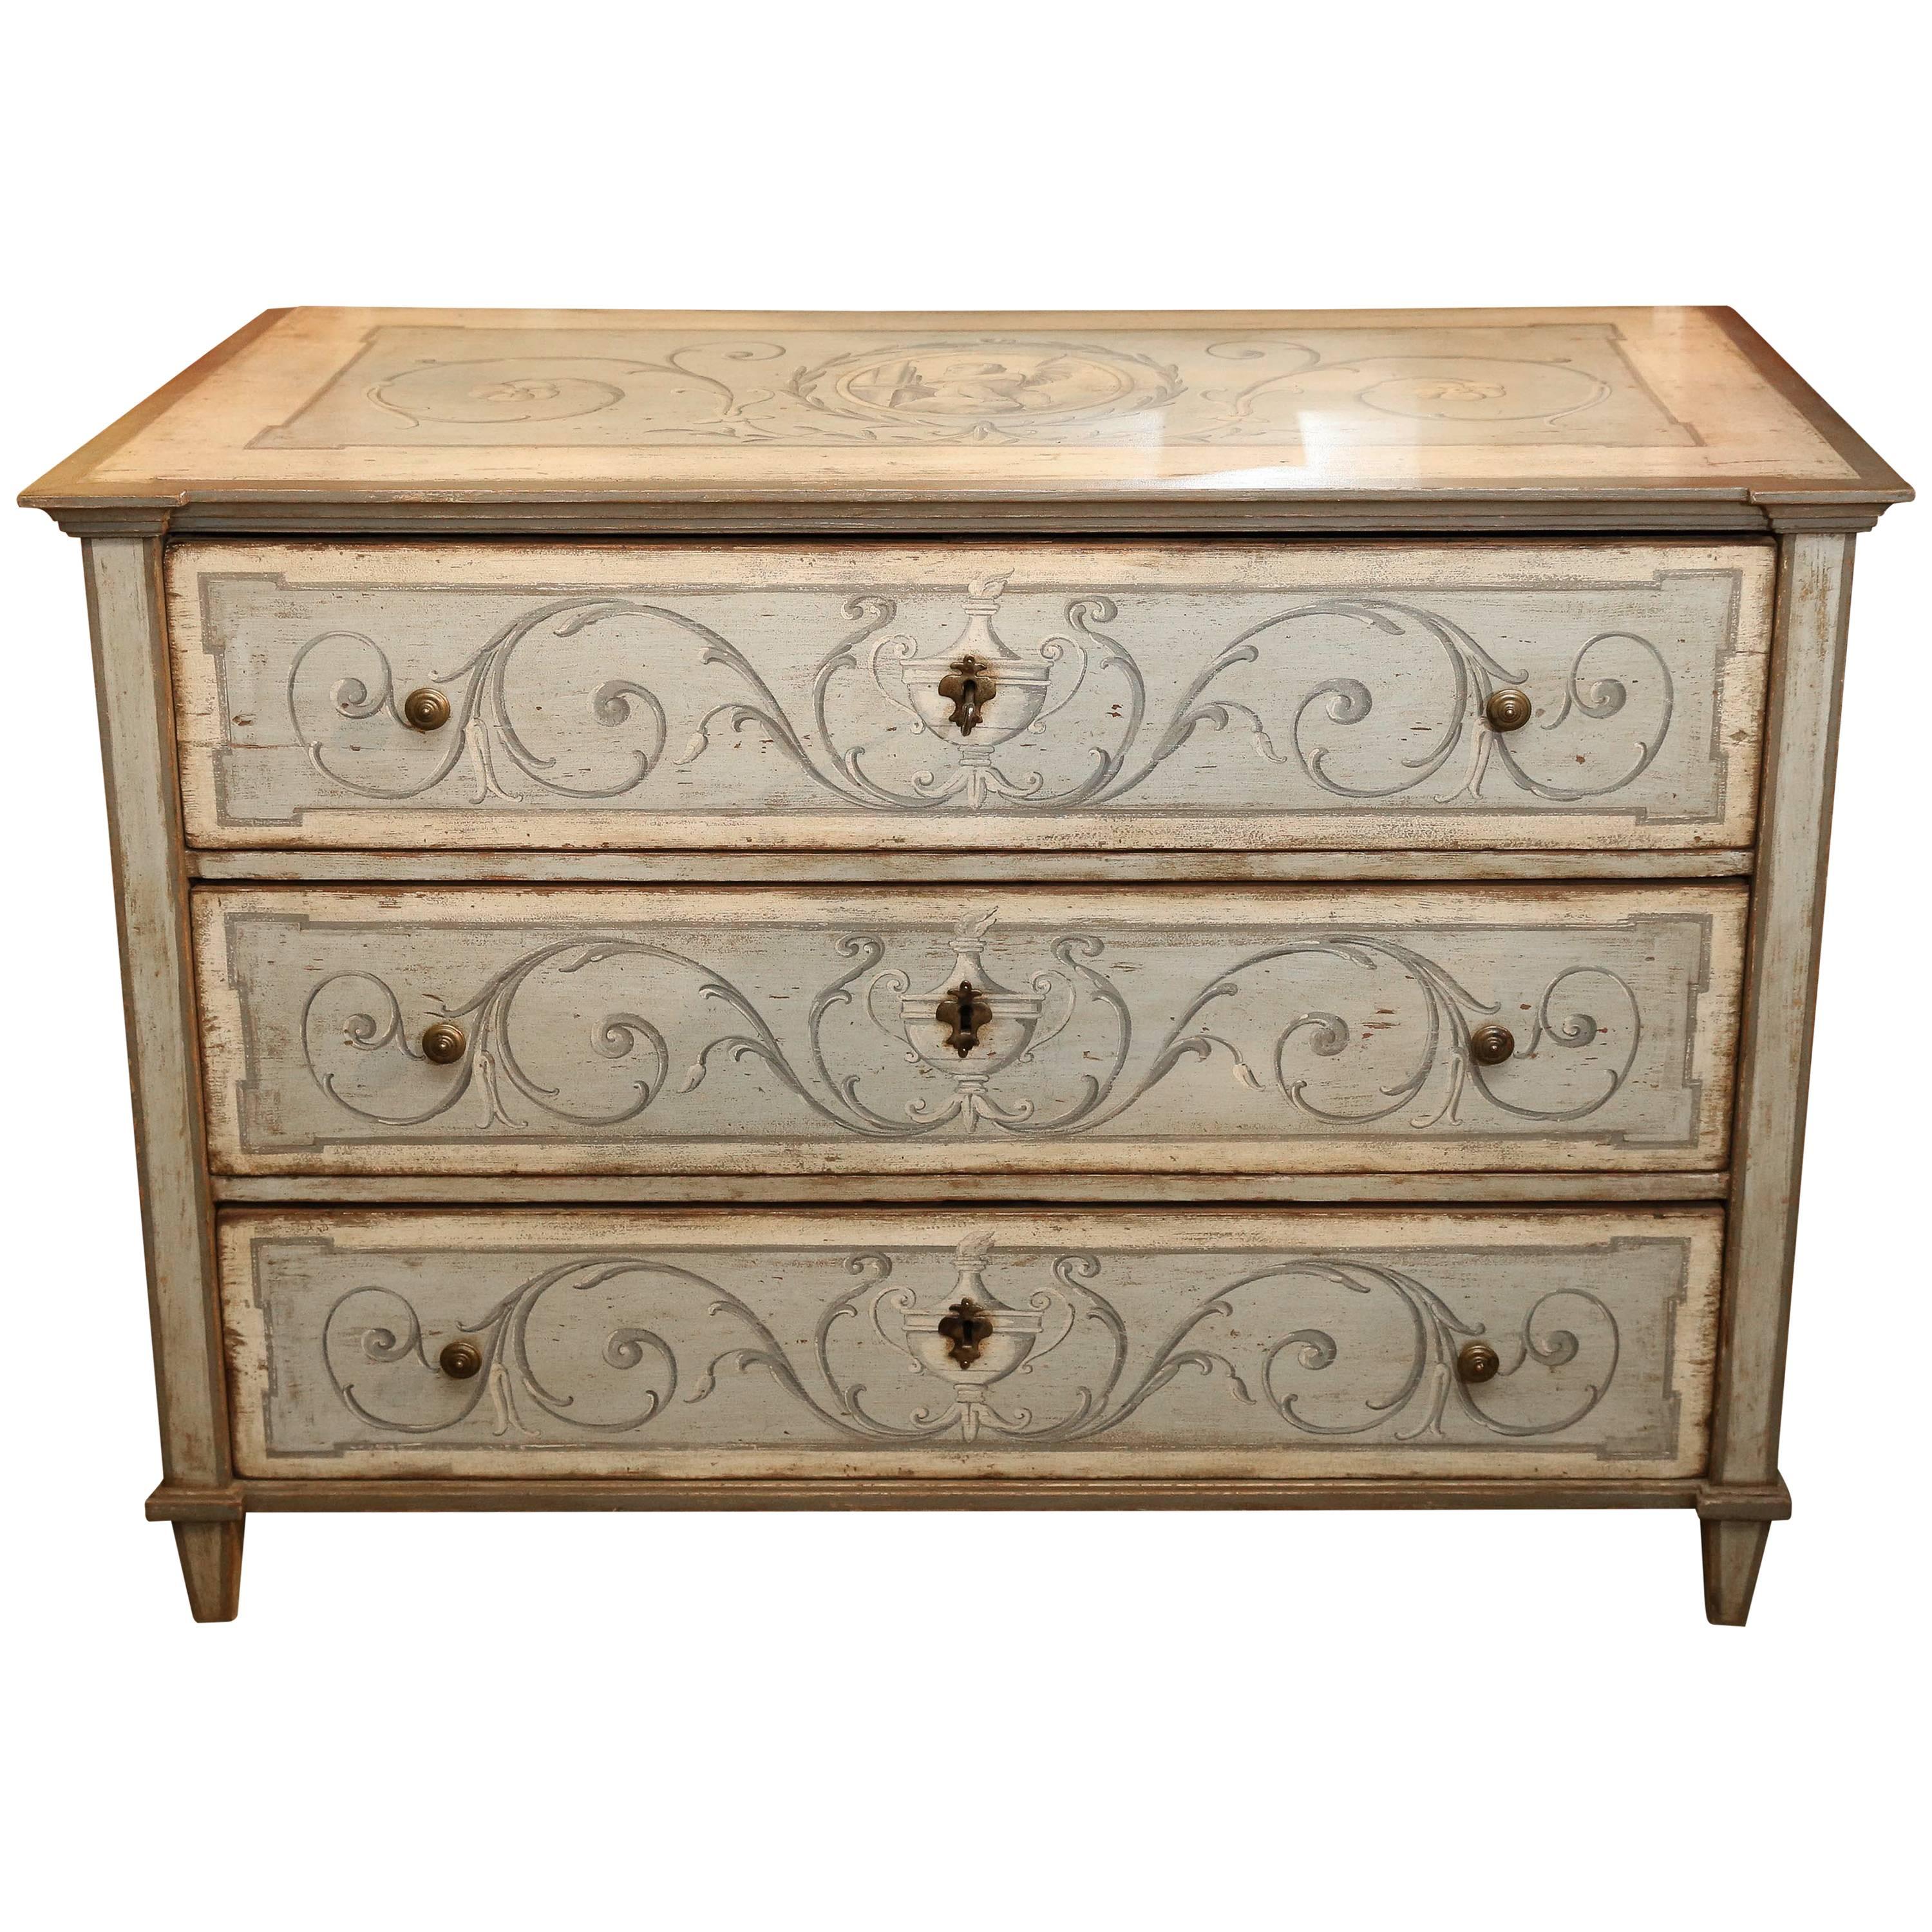 Polychromed Italian Neoclassical Style Chest, 19th Century